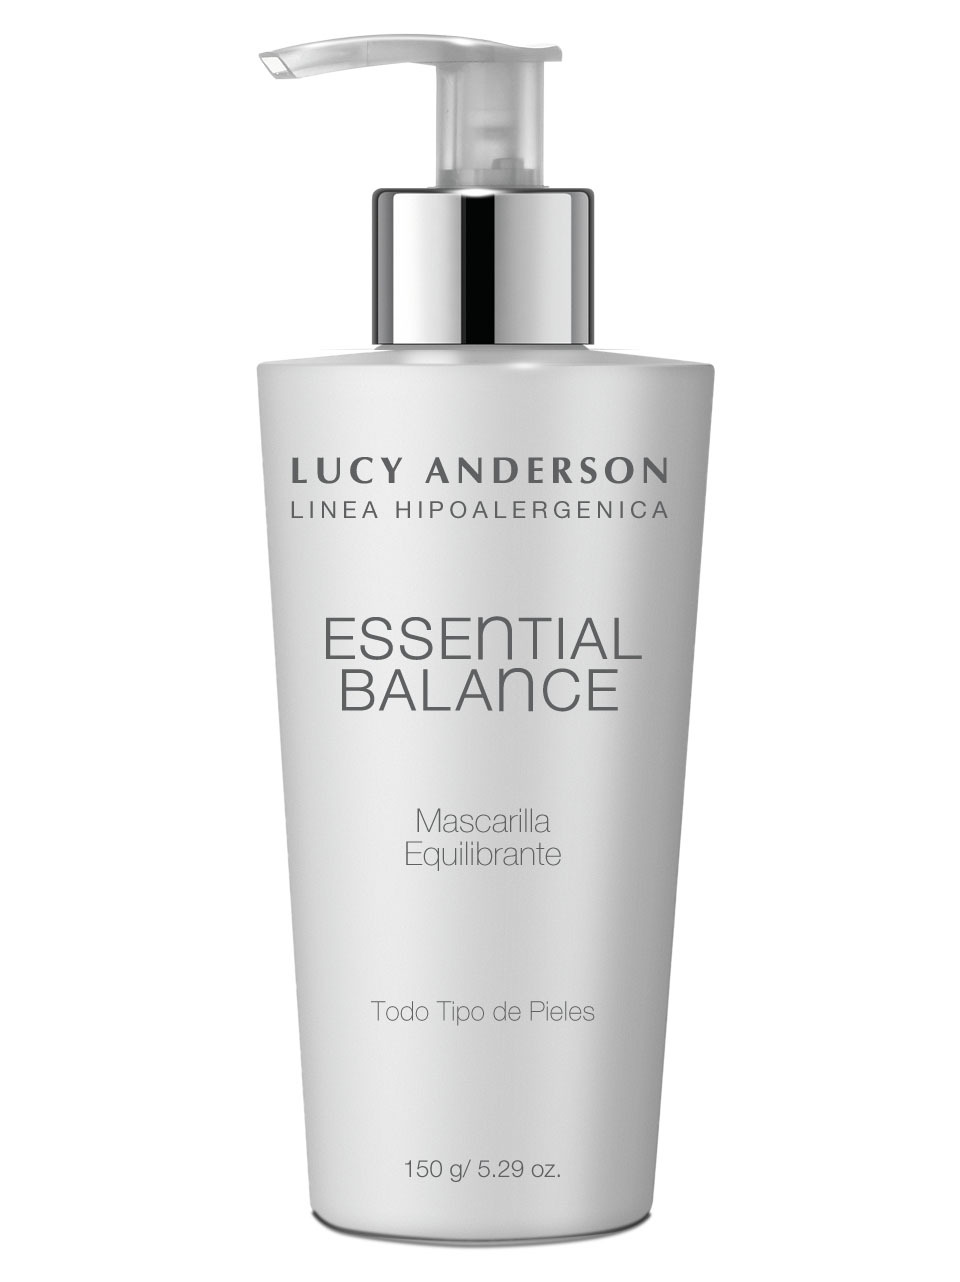 LUCY ANDERSON MASCARILLA EQUILIBRANTE ESSENTIAL BALANCE X 200 ML.